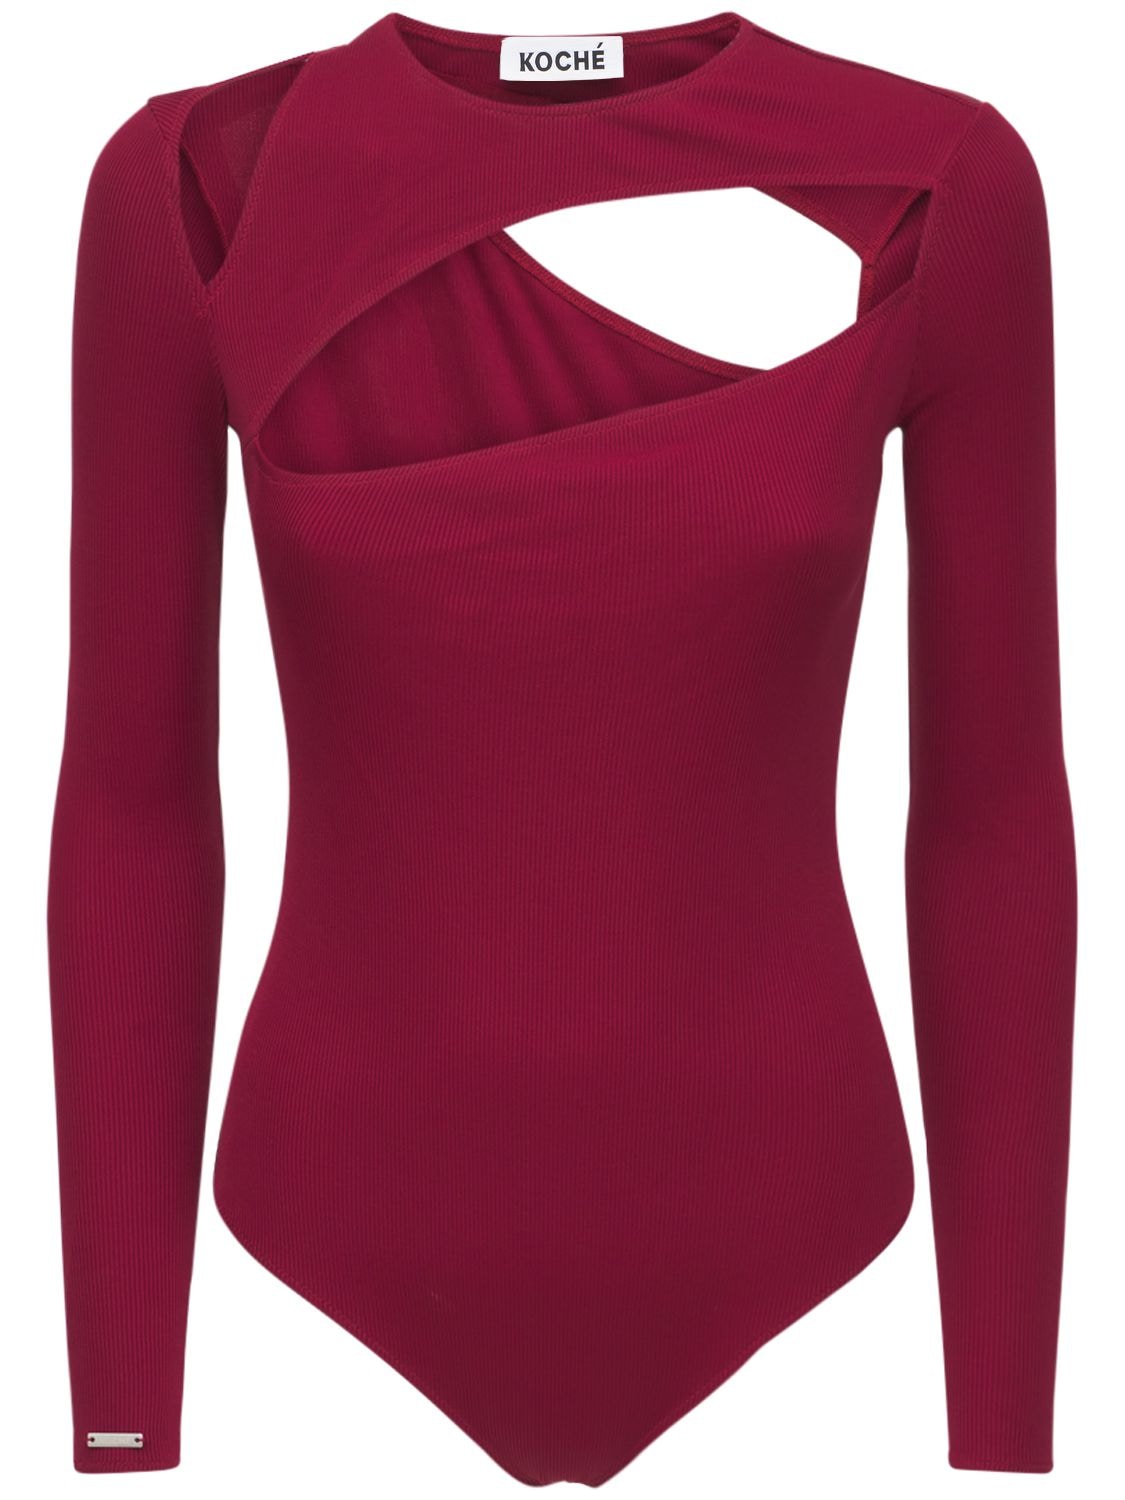 Koché Ribbed Jersey Body W/cut Out Details In Burgundy